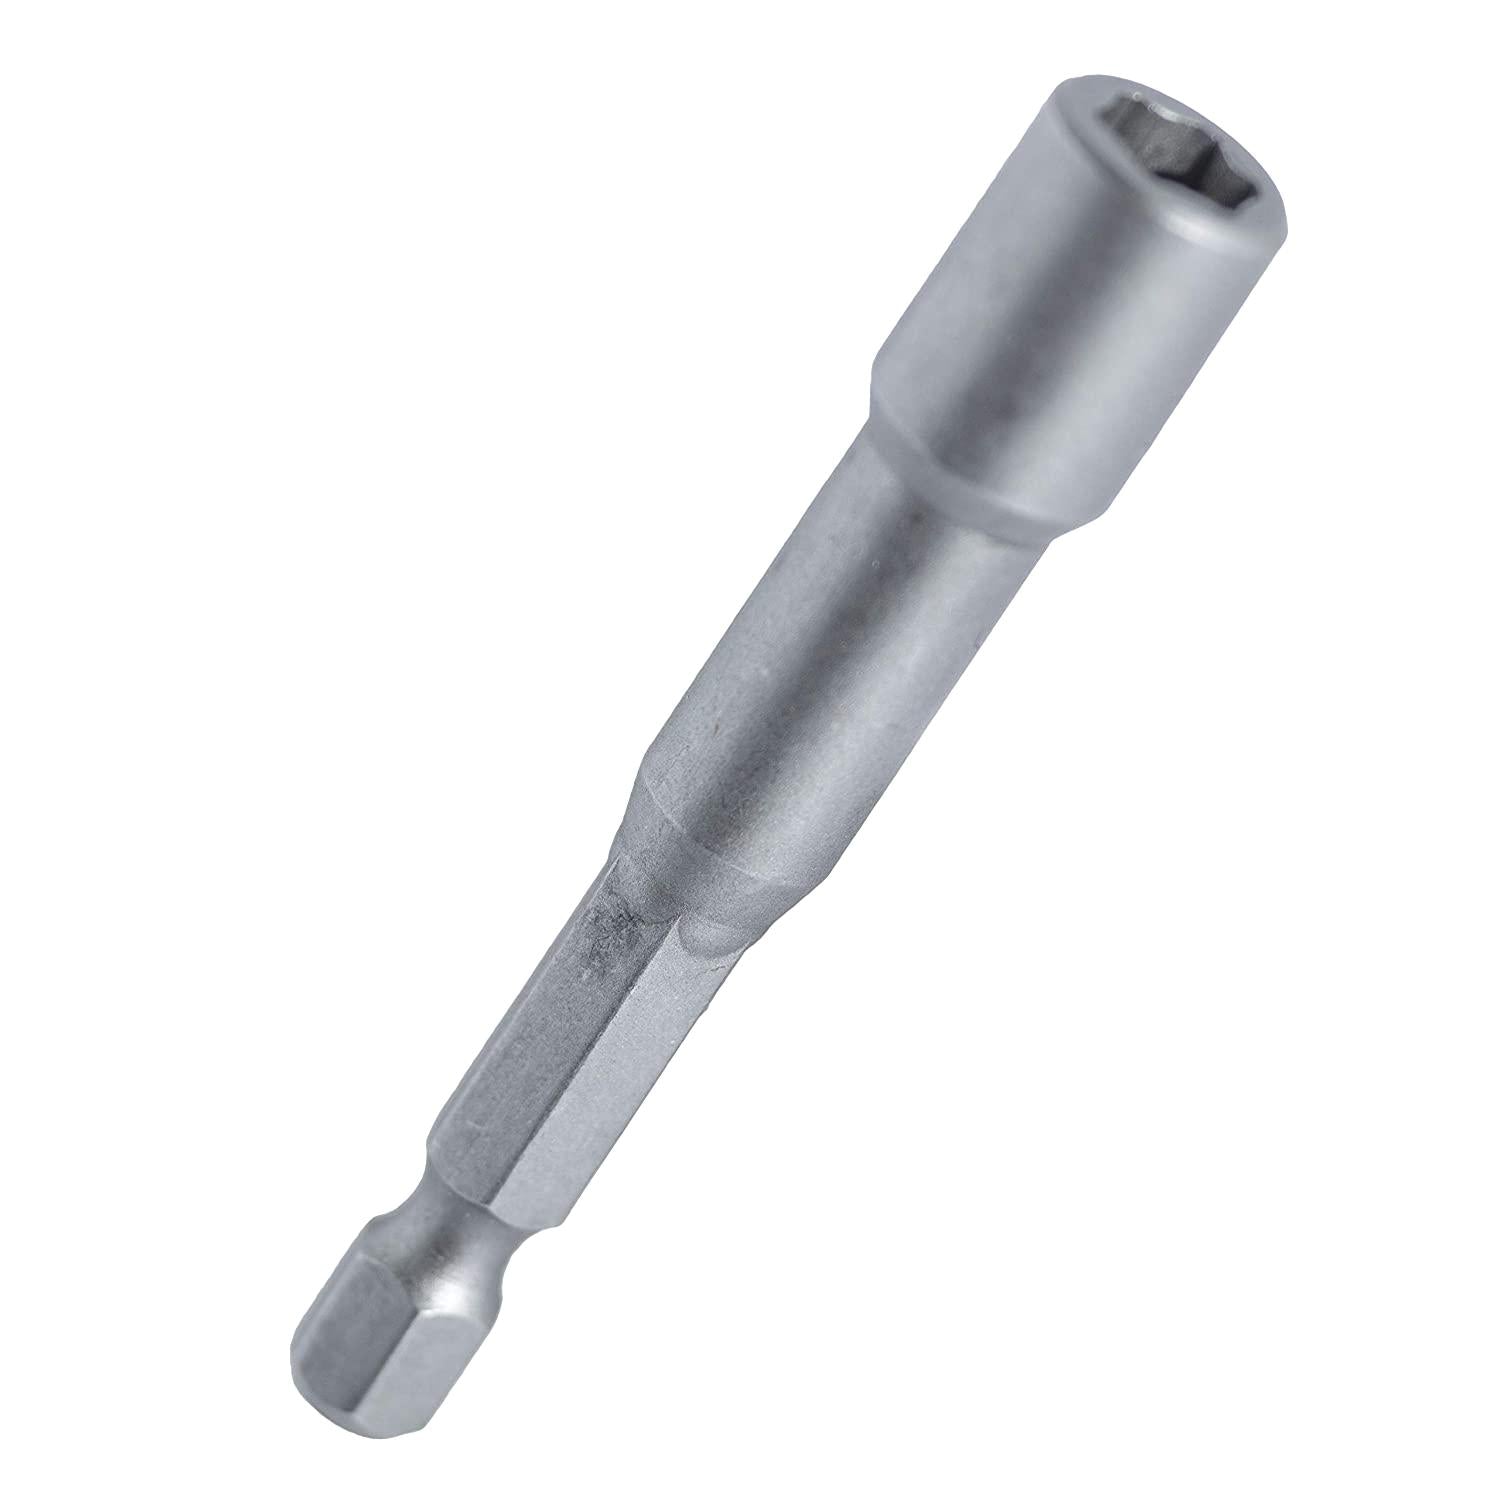 The Perma Cover High Quality Hex Bit Drivers - Multiple Sizes & Quantities feature a cylindrical shape and a six-sided hexagonal head. Crafted from chrome vanadium steel, they boast a slight taper in the middle and are designed to fit into power tools, such as drills or drivers, offering versatile utility for connecting hexagonal screws or bolts.